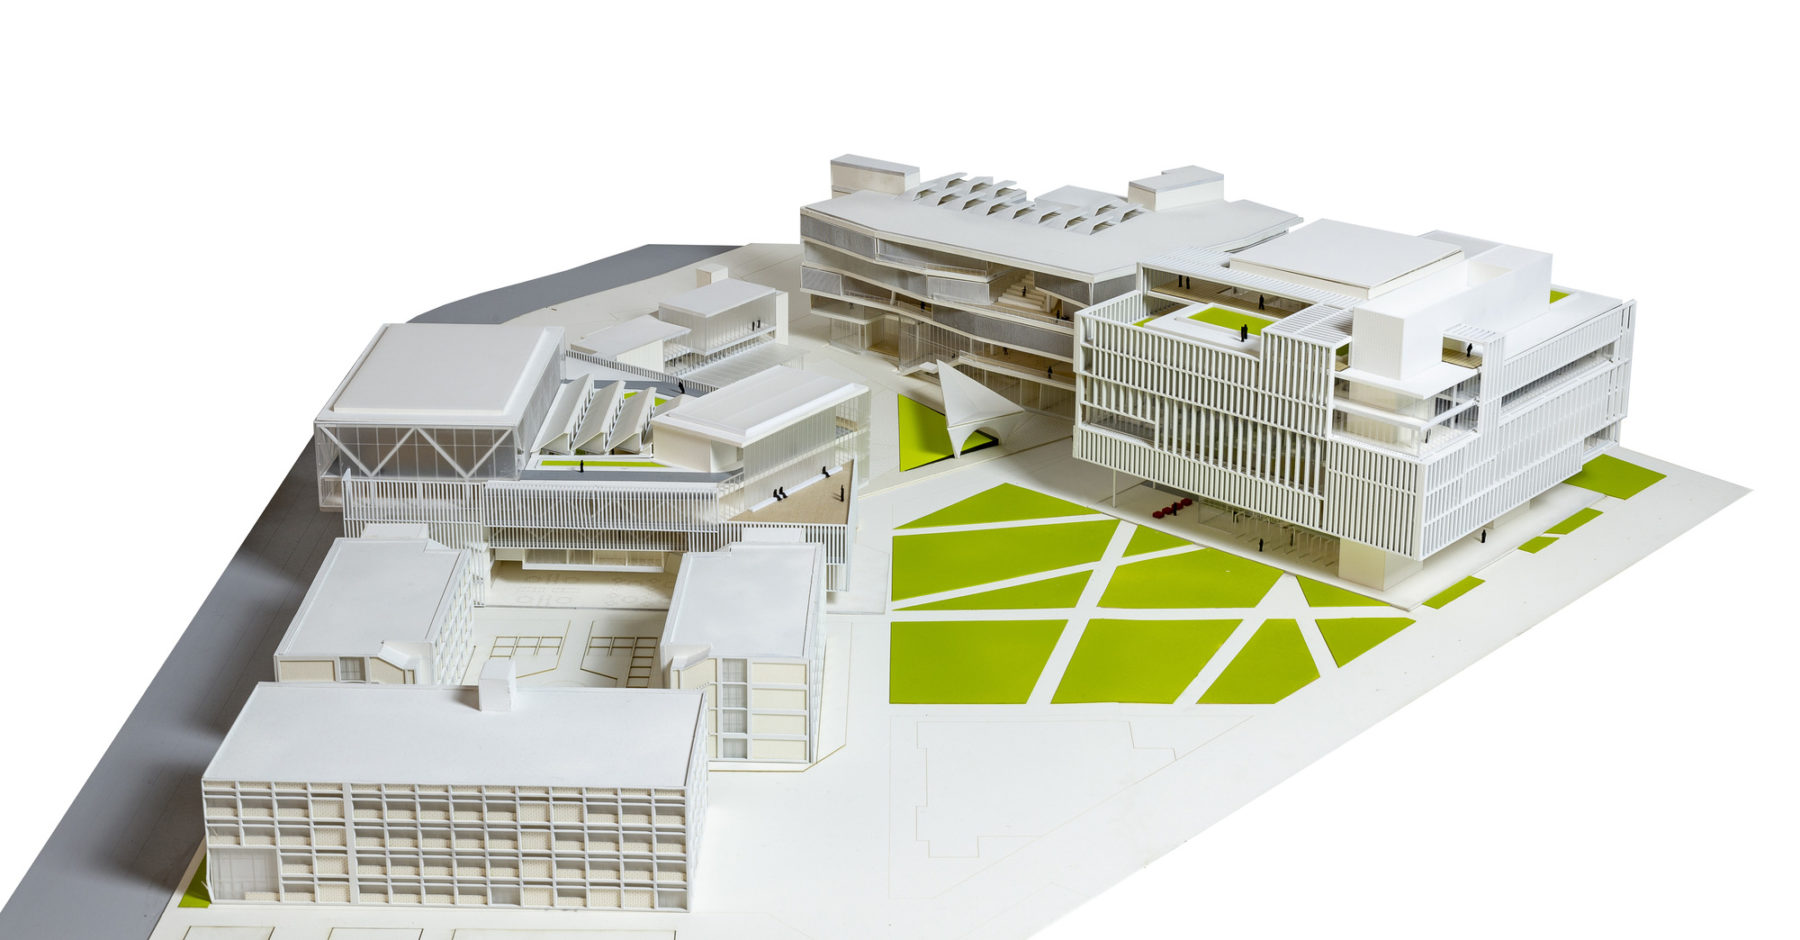 Photo of a model of the new buildings and quad